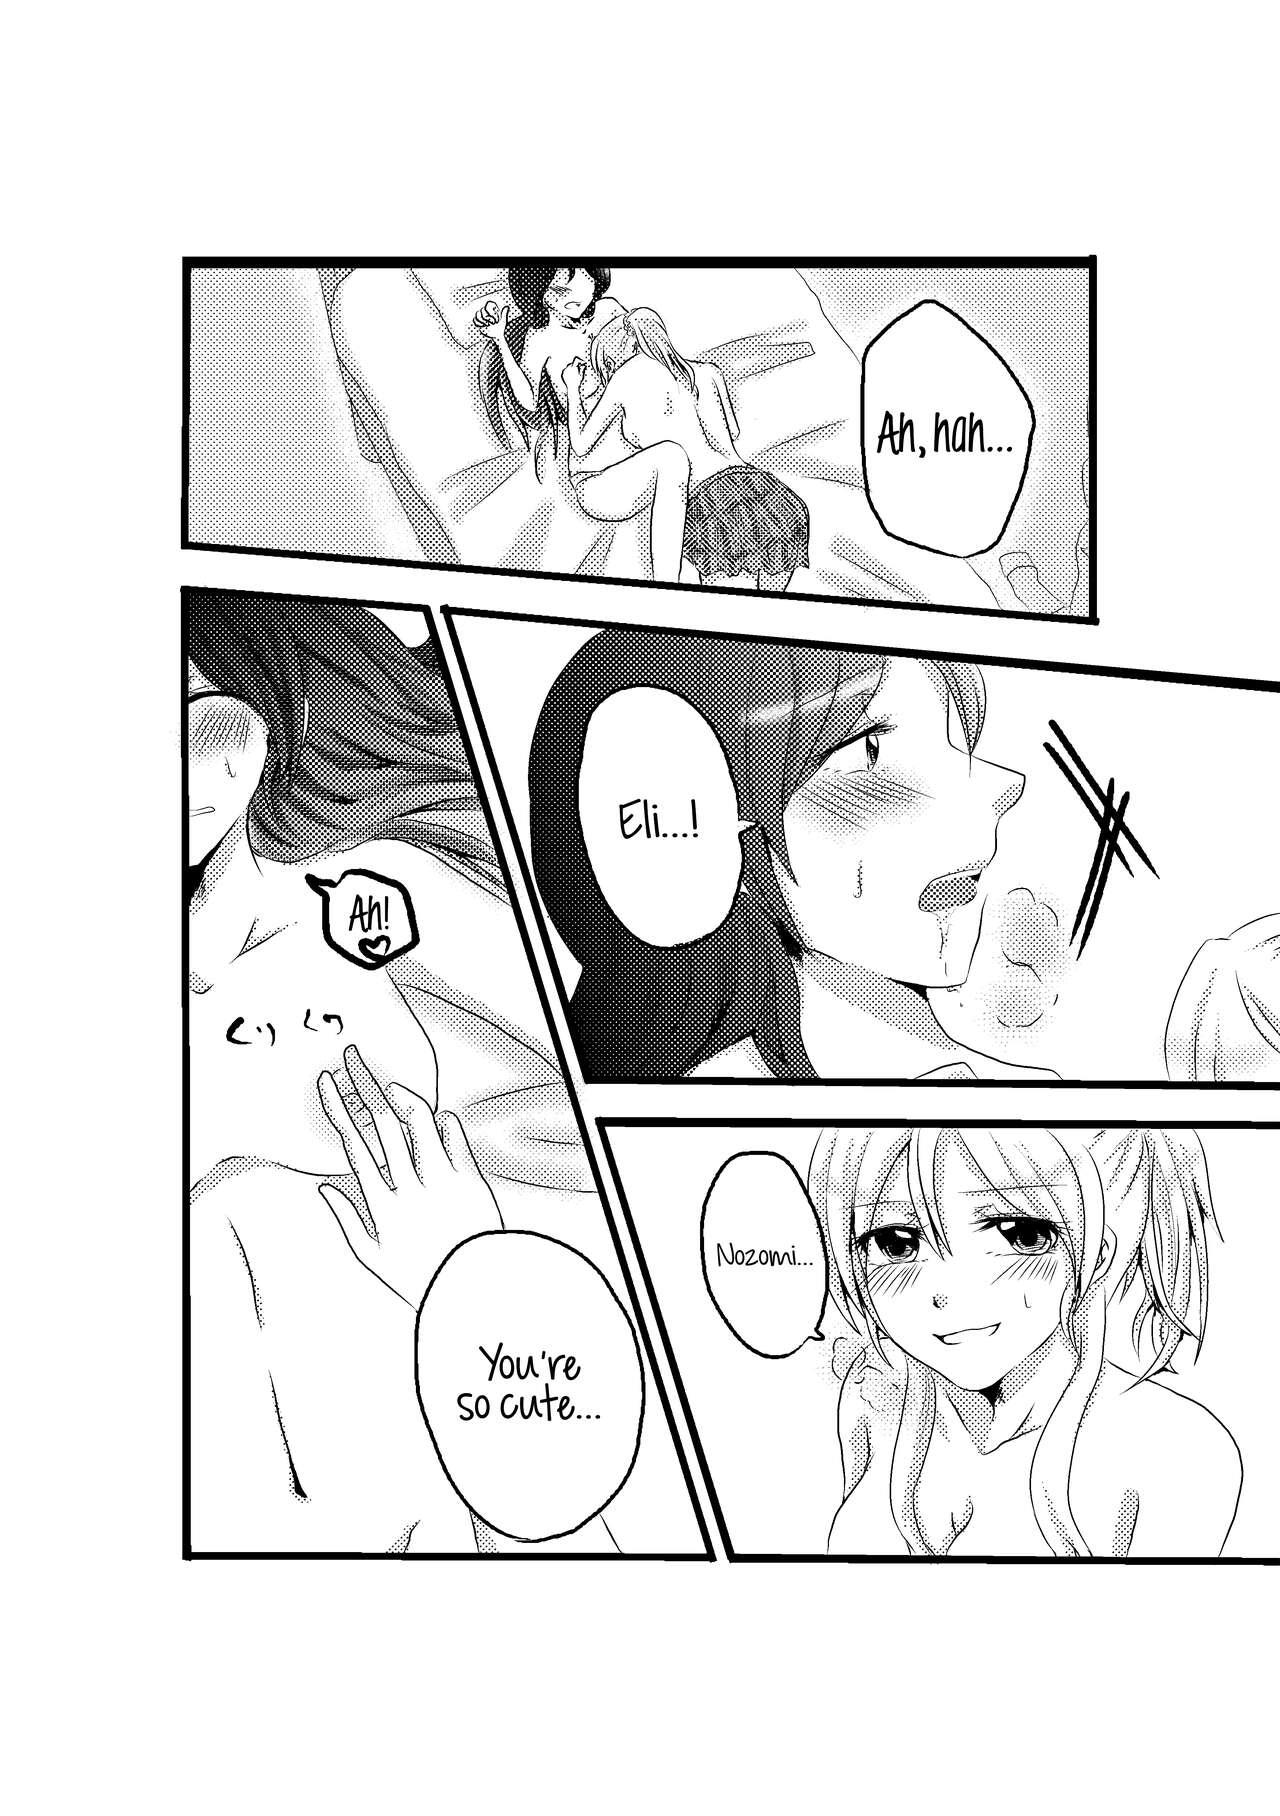 Funny [Inugoya (Toshiko)] A story about mischievous Eli-chan and Nozomi-chan (Umi no Shinwa) (Love Live!) [English] [Usr32] [Digital] - Love live Best Blowjobs Ever - Page 7